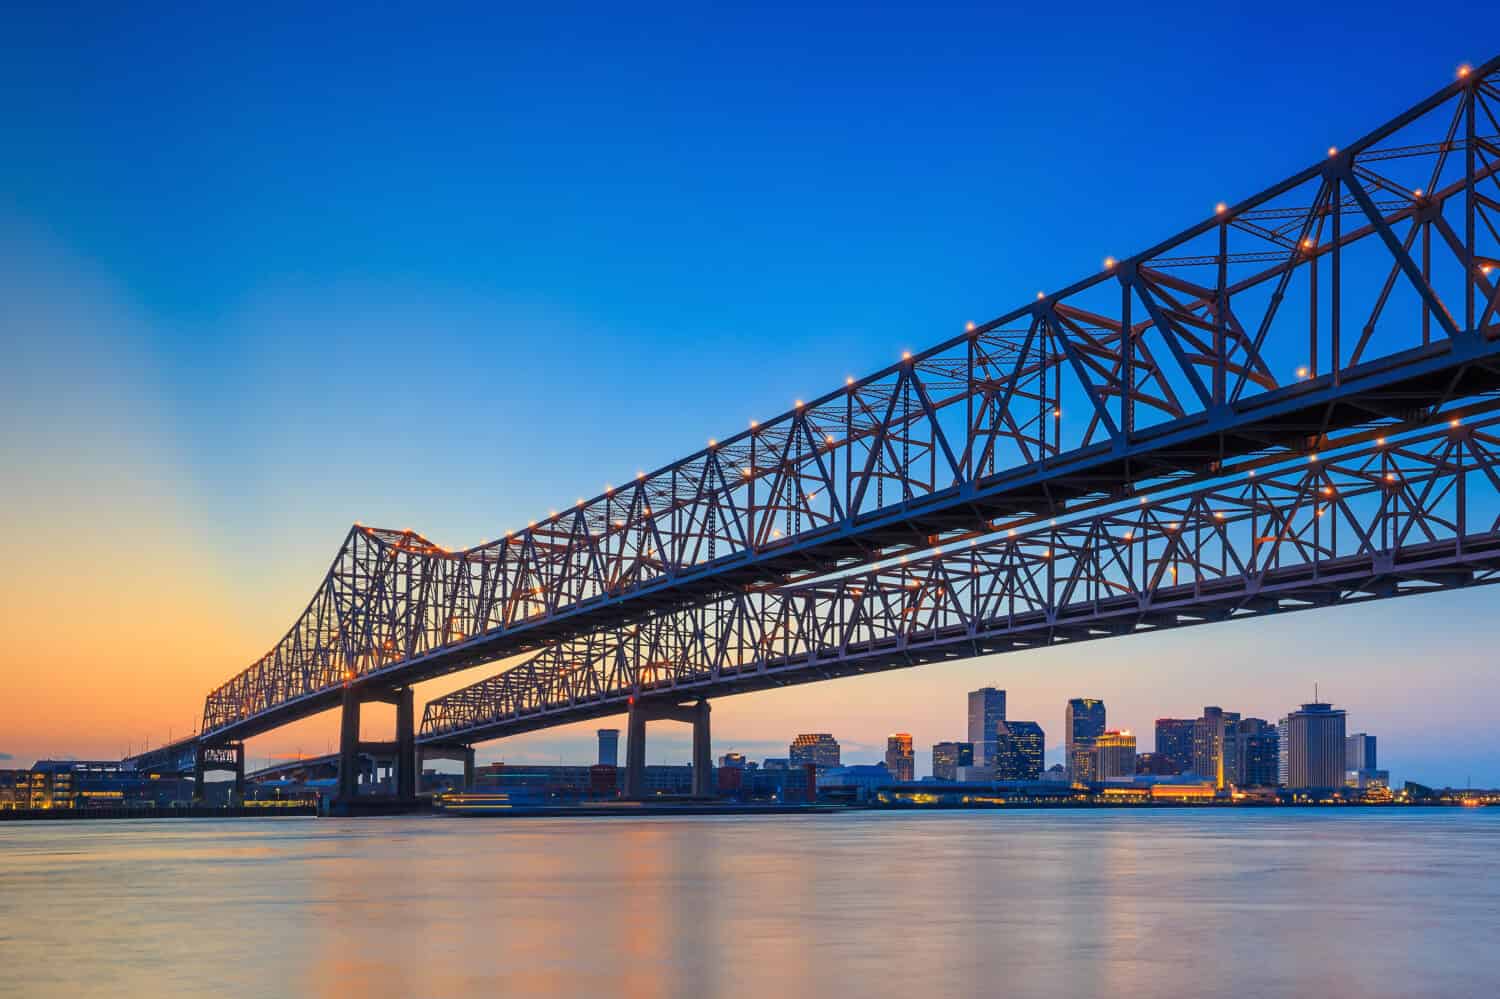 The Crescent City Connection Bridge on the Mississippi river and downtown New Orleans Louisiana